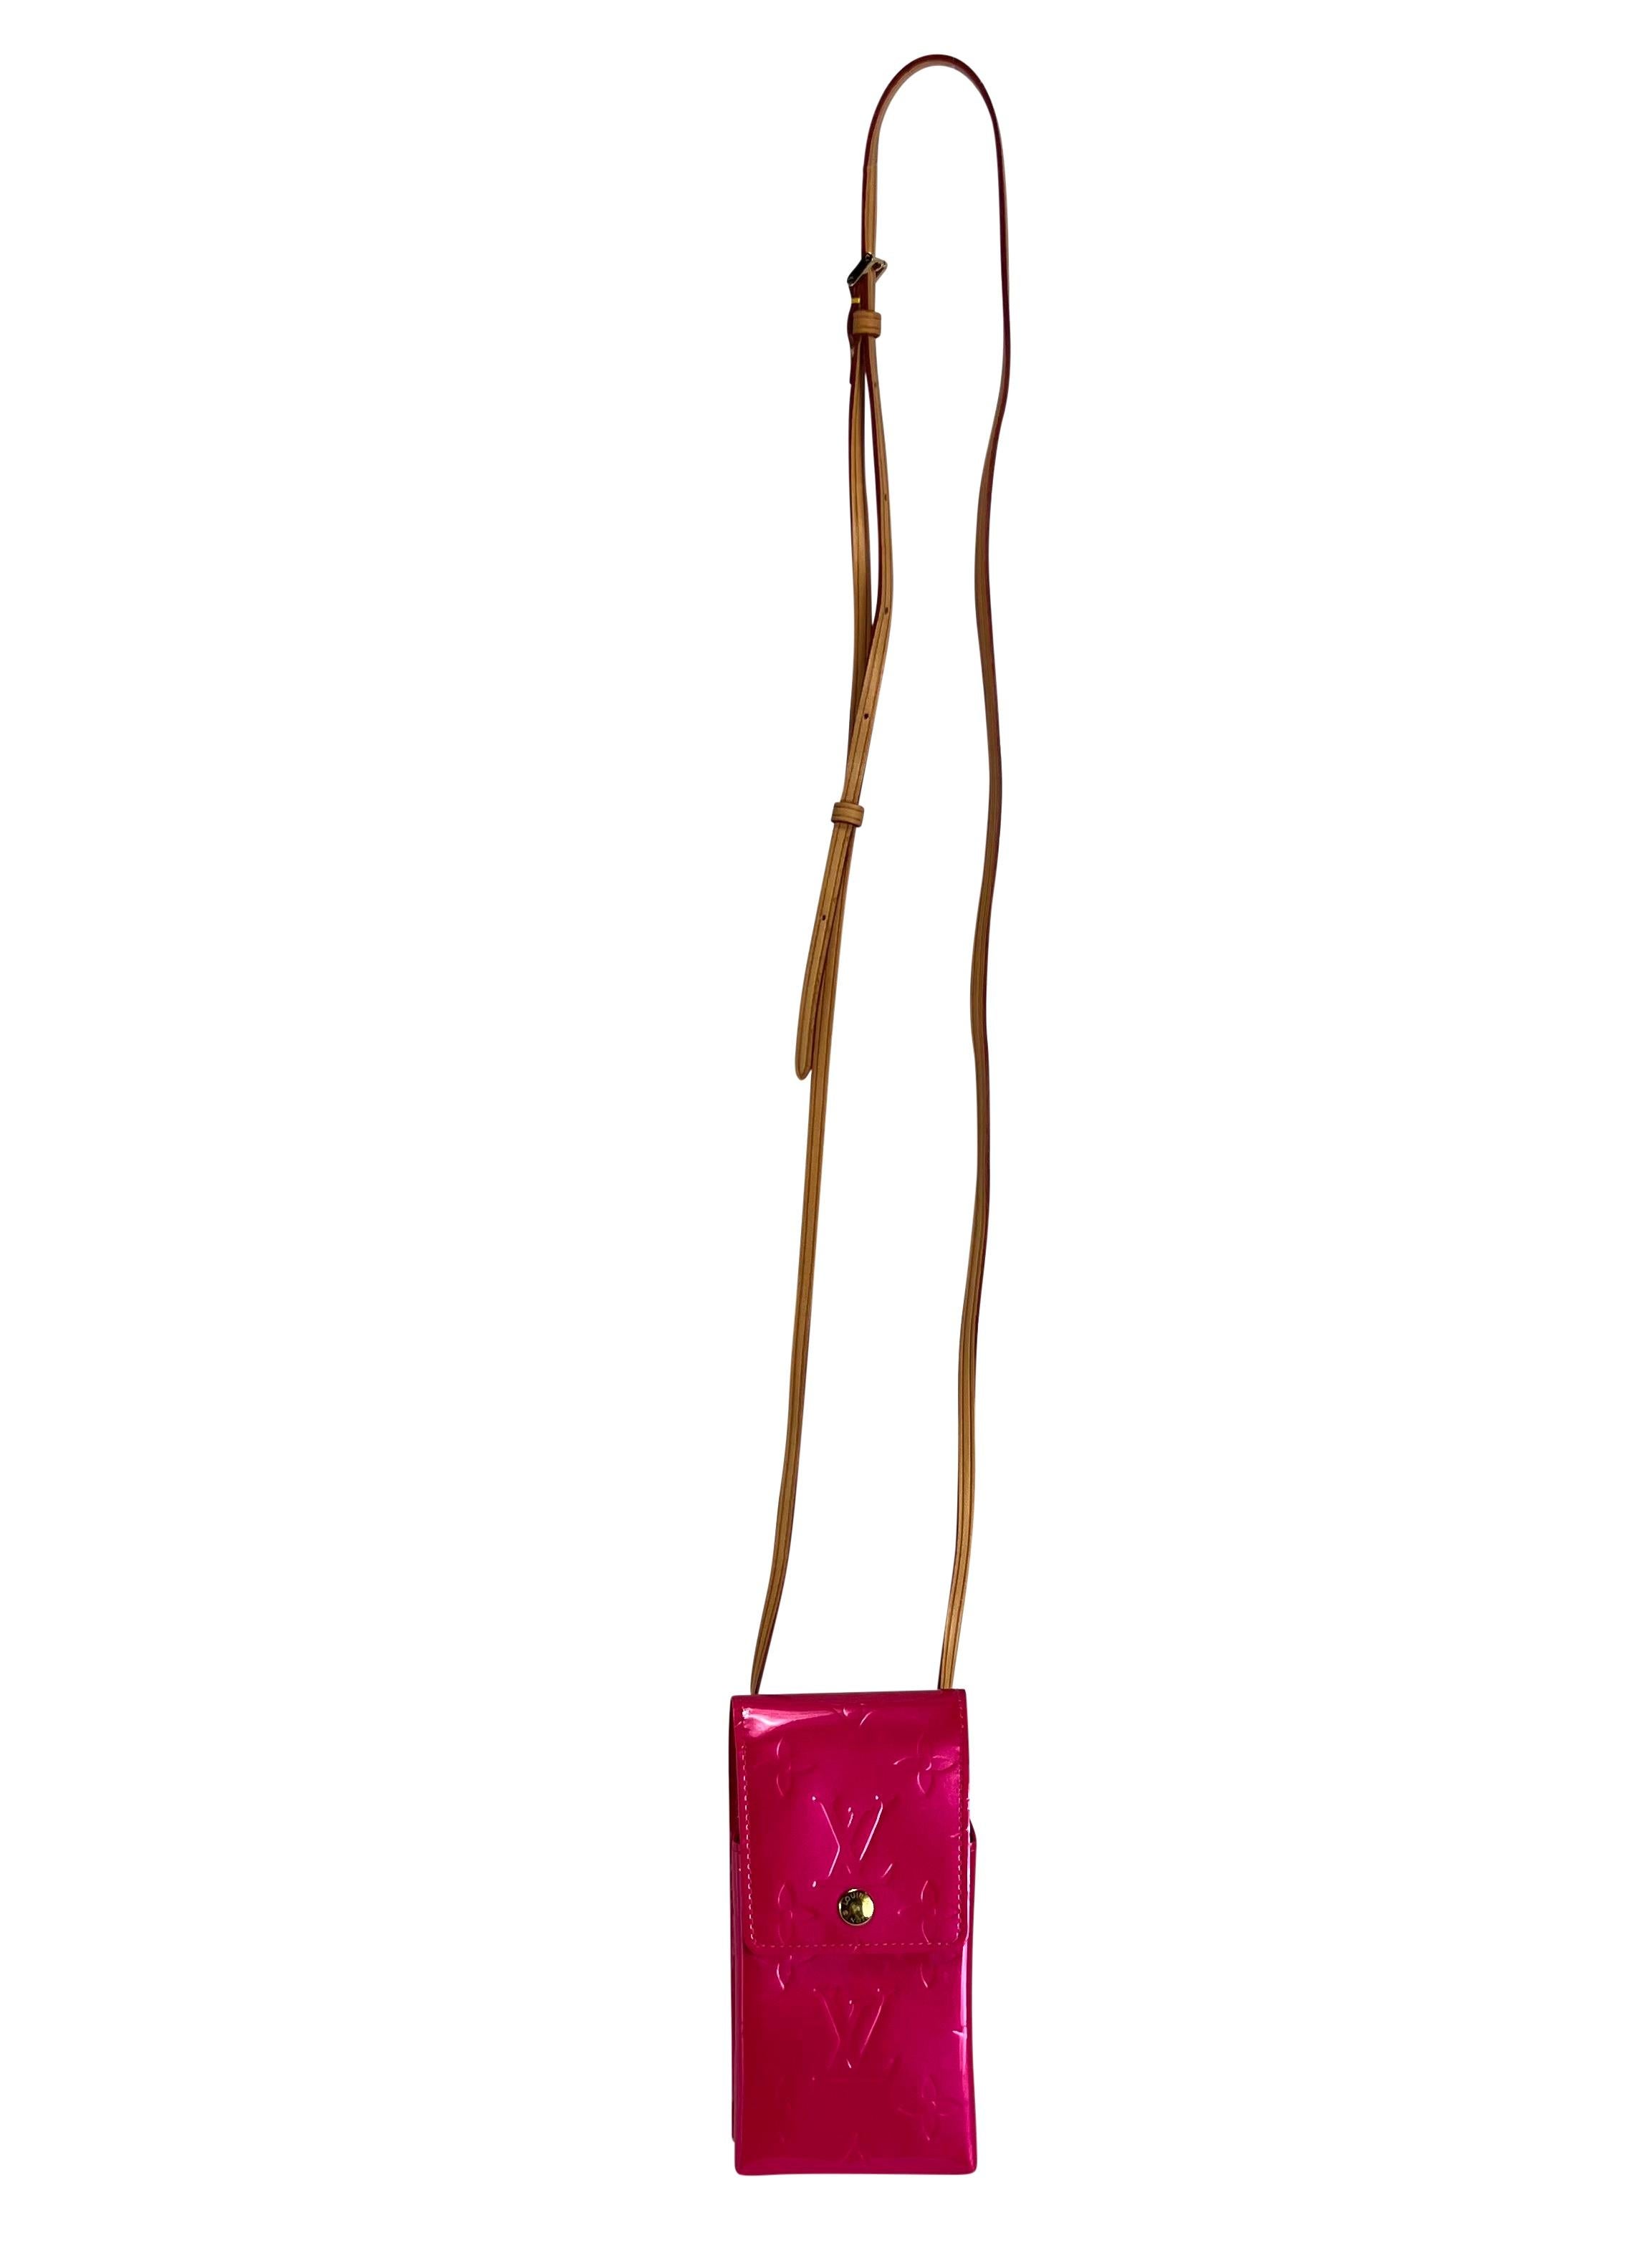 Presenting a fabulous hot pink Louis Vuitton Vernis phone holder bag. From 1999, this fantastic minibag/phone holder is constructed of hot pink patent leather embossed with the famous LV print and is made complete with an adjustable leather strap.